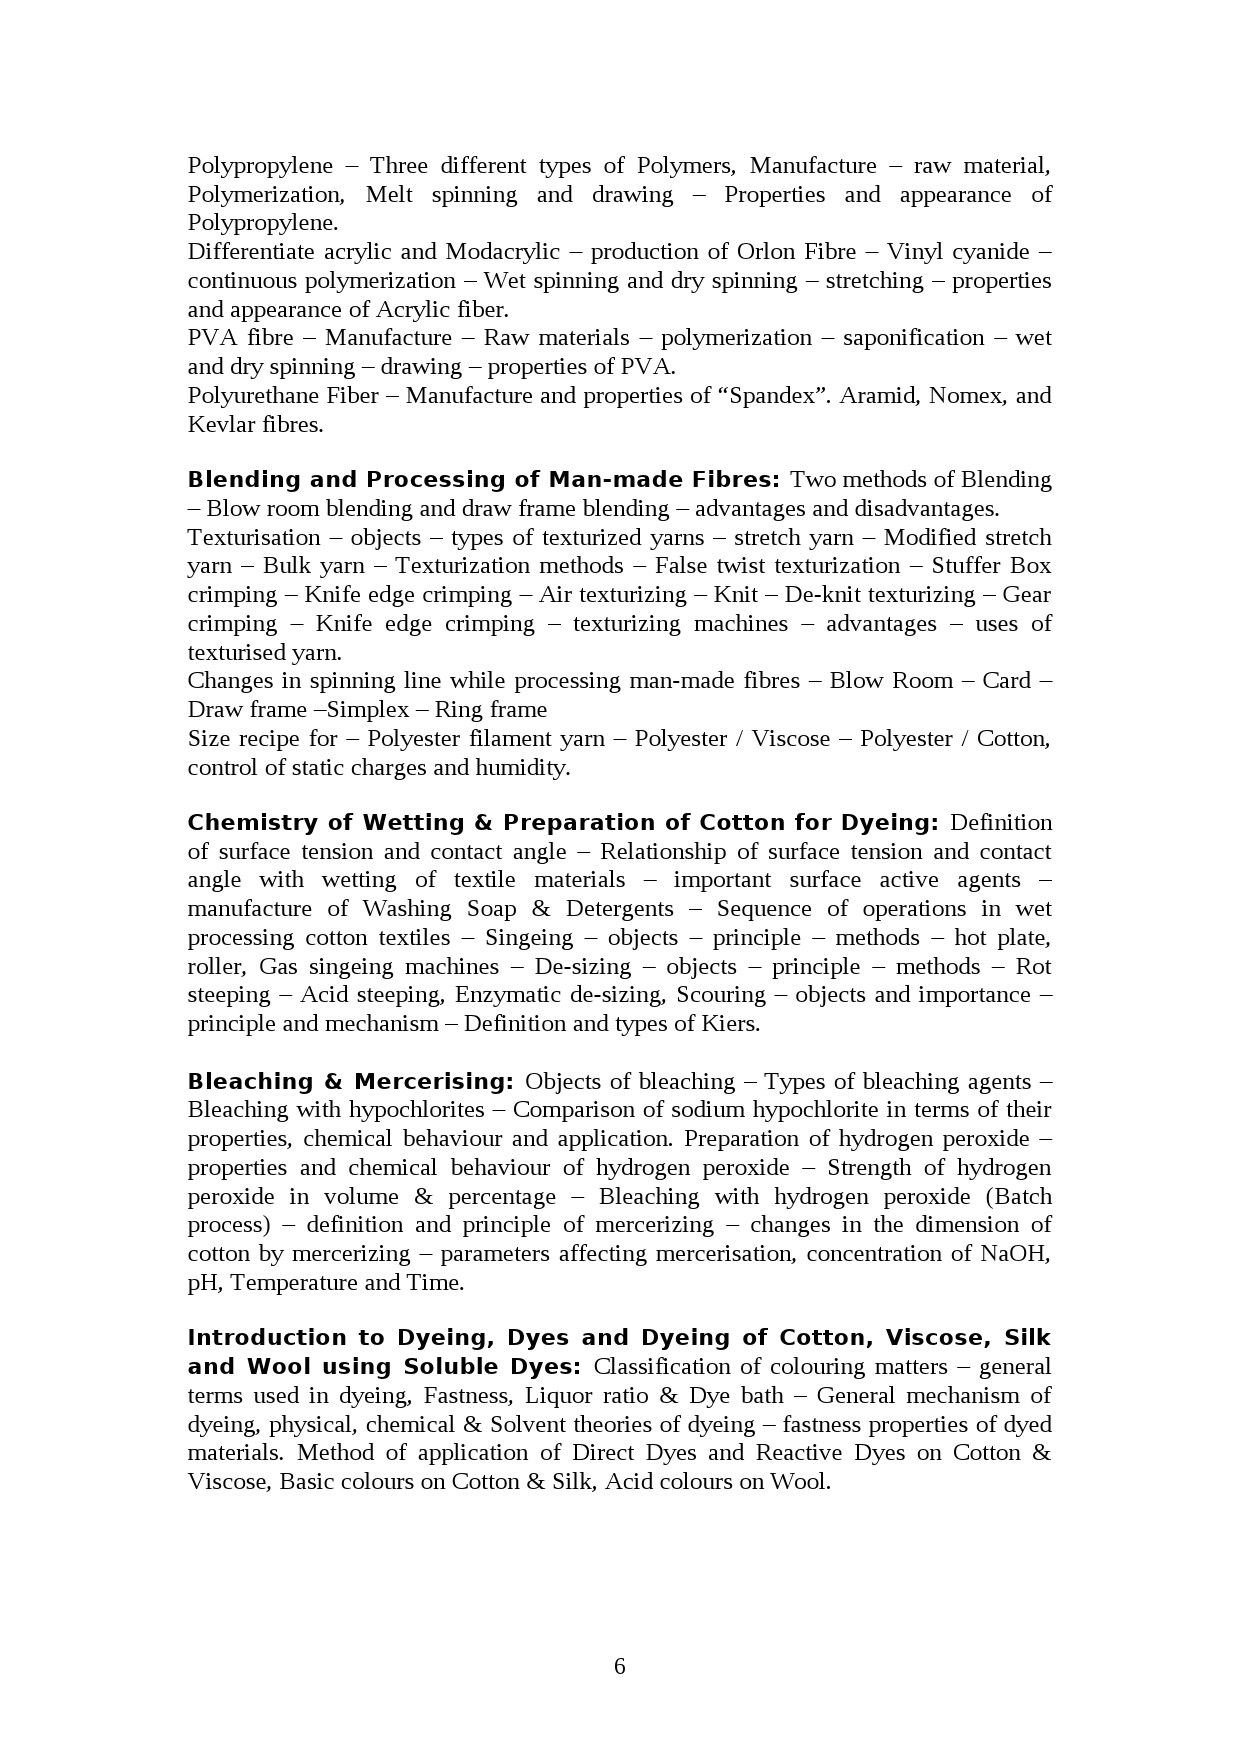 Textile Technology Lecturer in Polytechnic Exam Syllabus - Notification Image 6